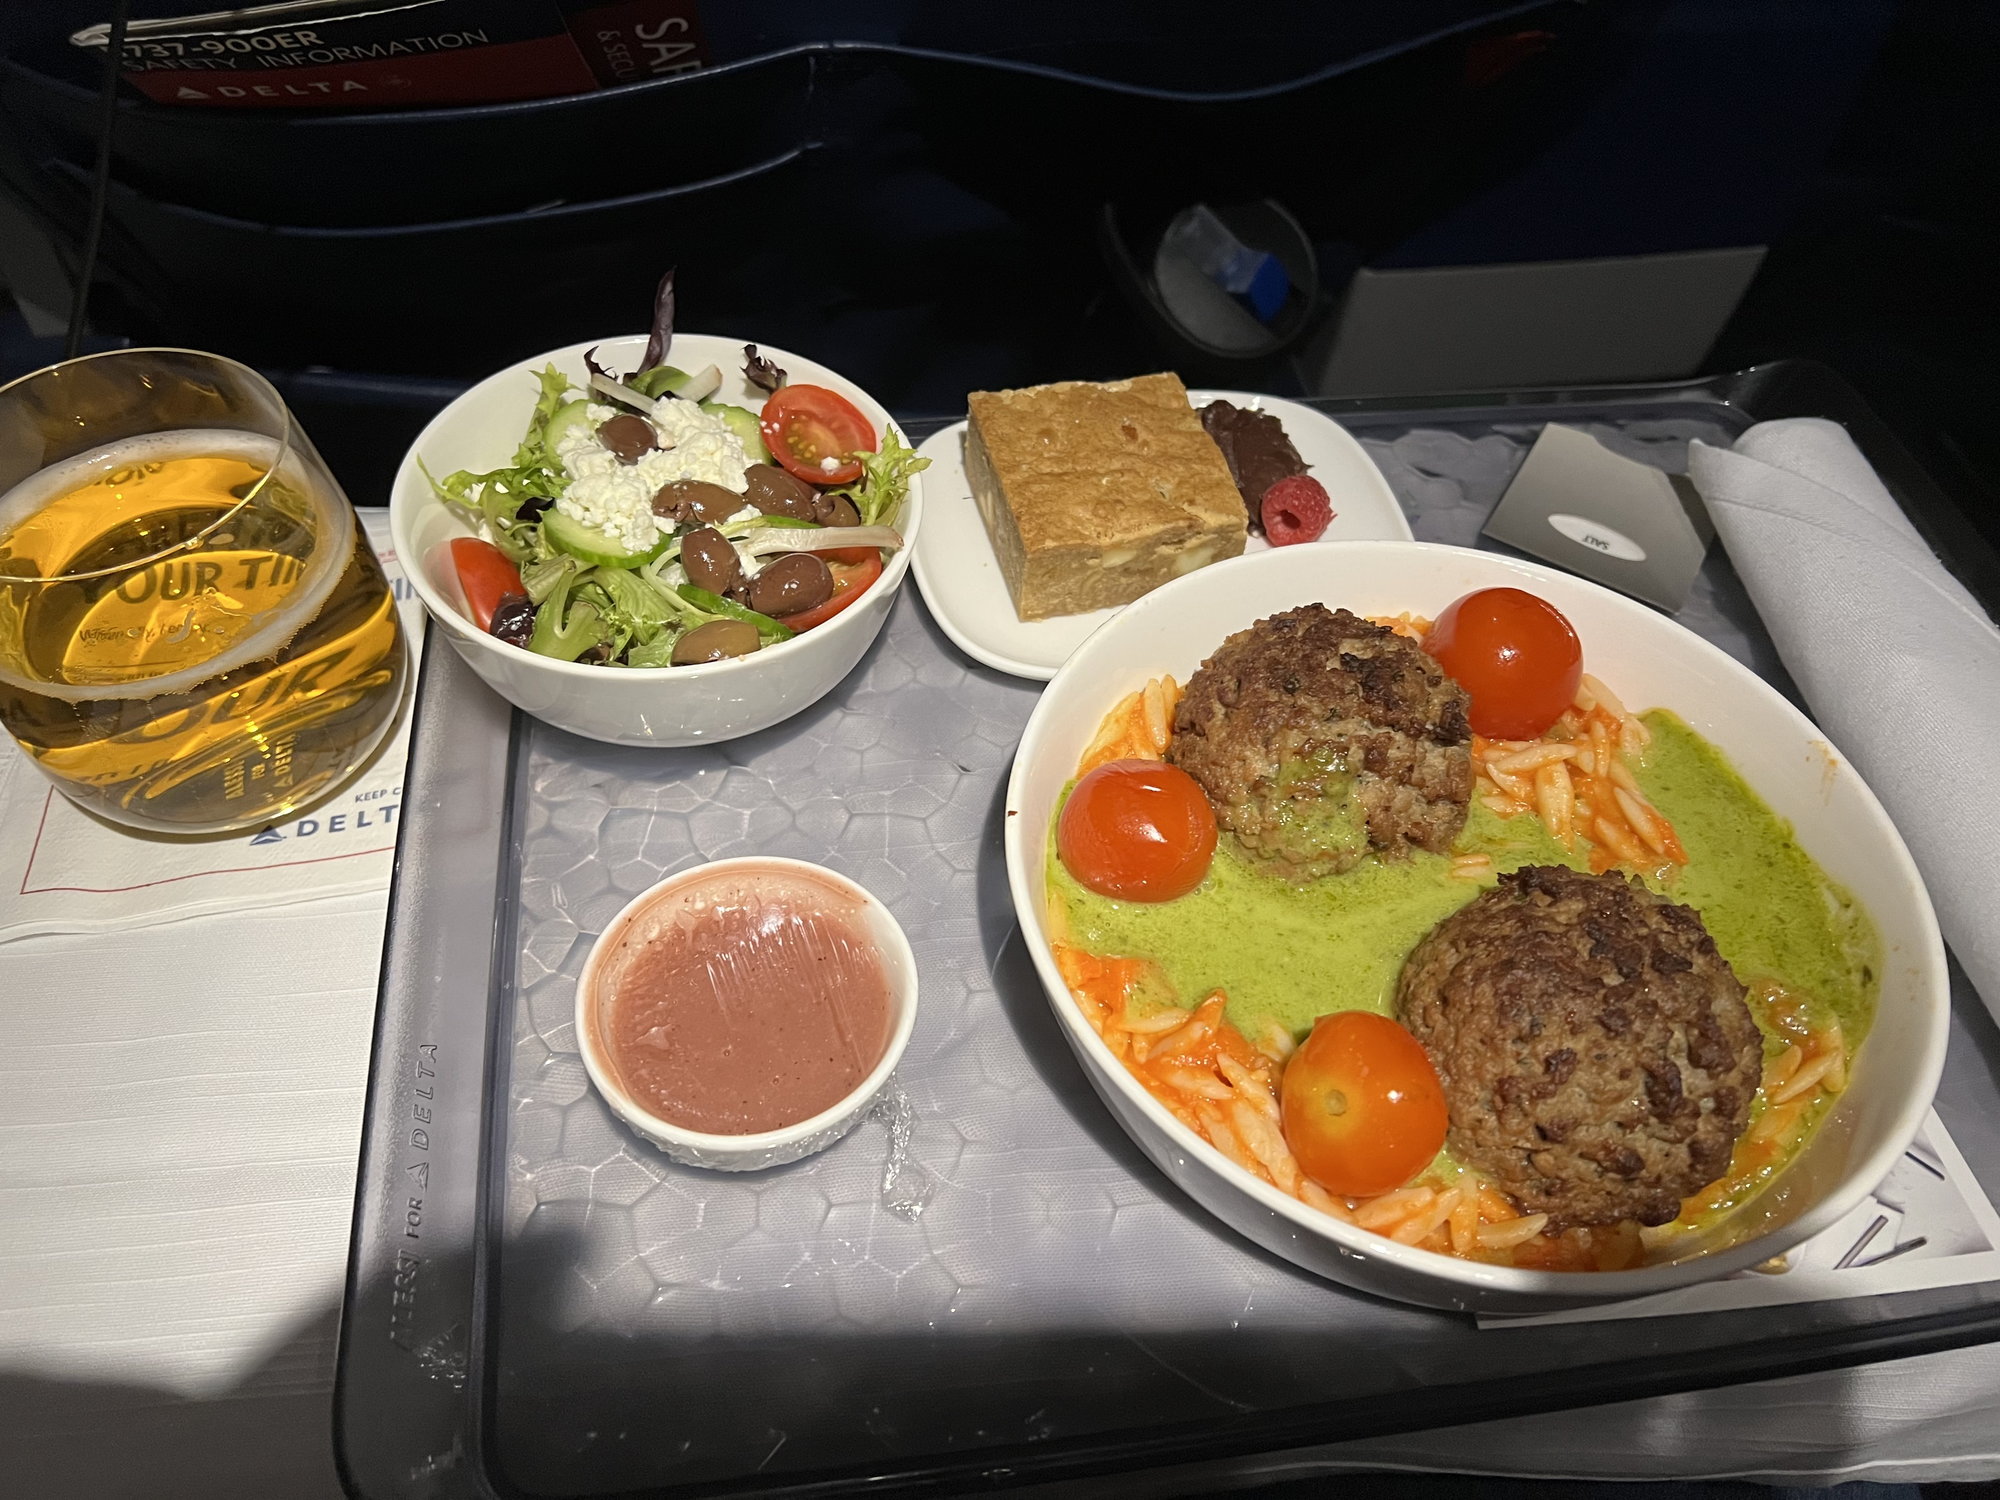 Delta's onboard menu adds kid-friendly, parent-approved dishes